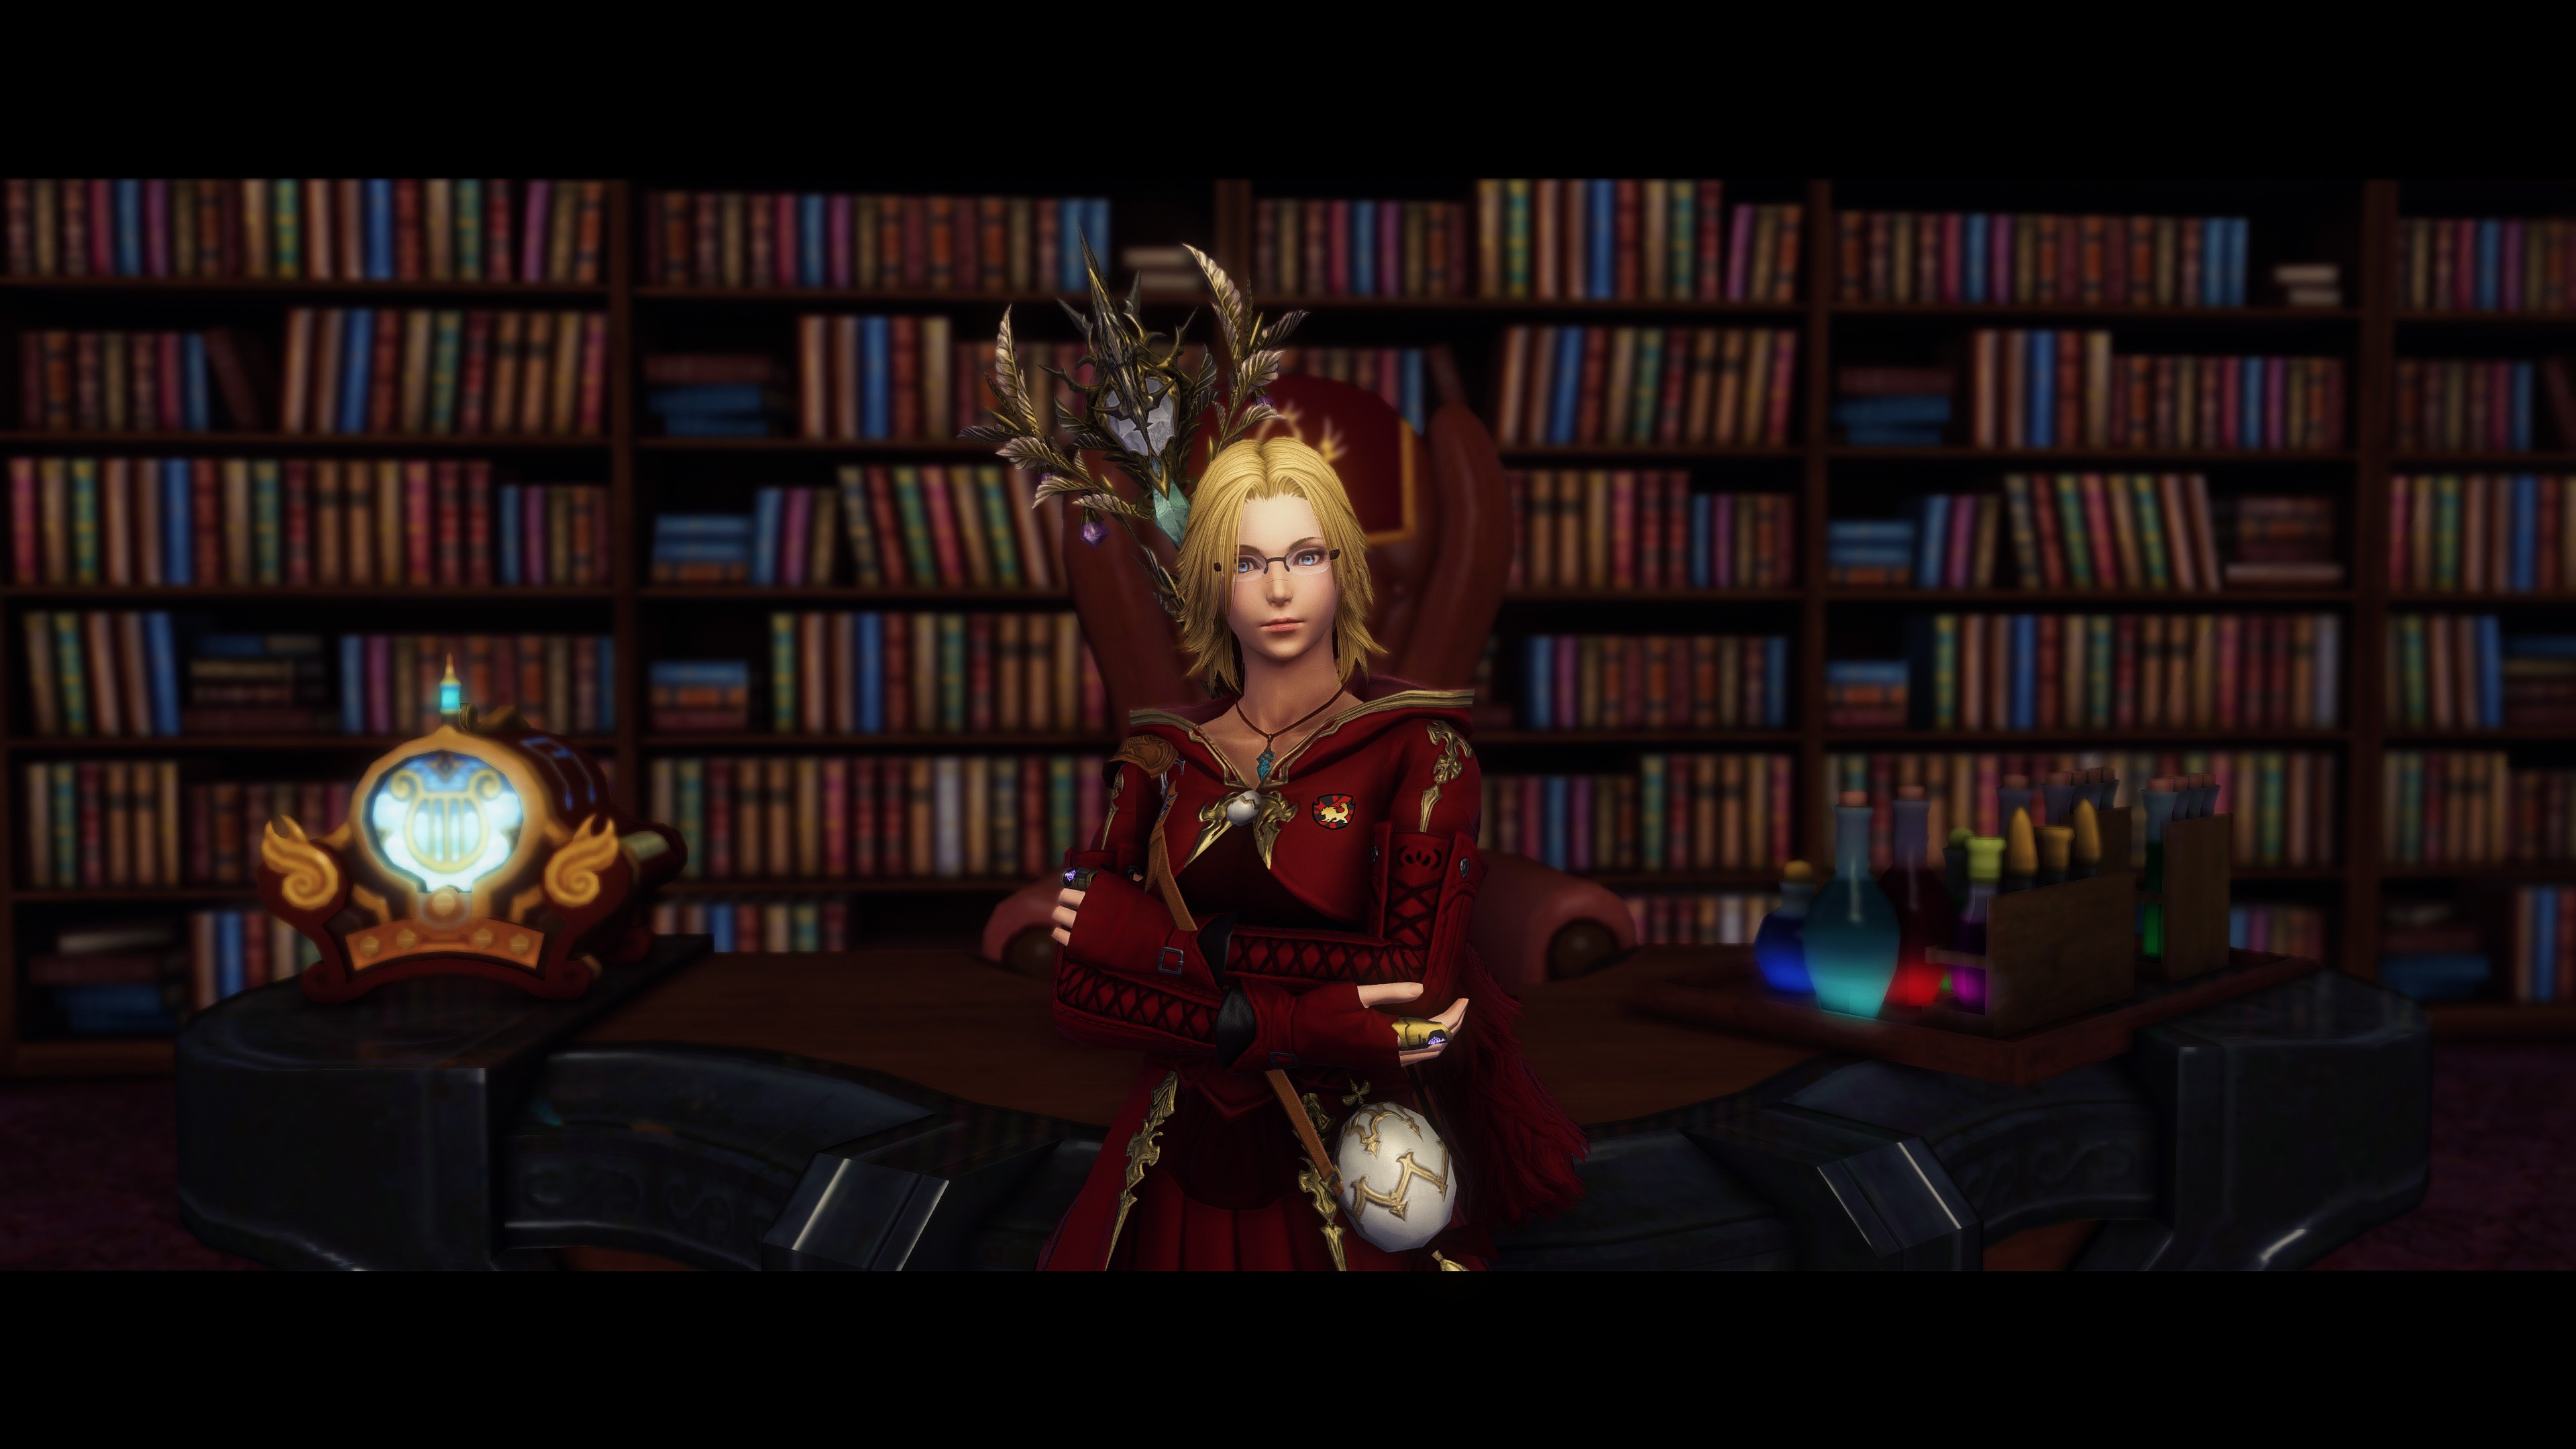 General 3840x2160 Warrior of Light (Final Fantasy) Final Fantasy XIV: A Realm Reborn video game characters CGI video game art screen shot bookshelves video games potions looking at viewer library books table blonde glasses arms crossed chair indoors women indoors